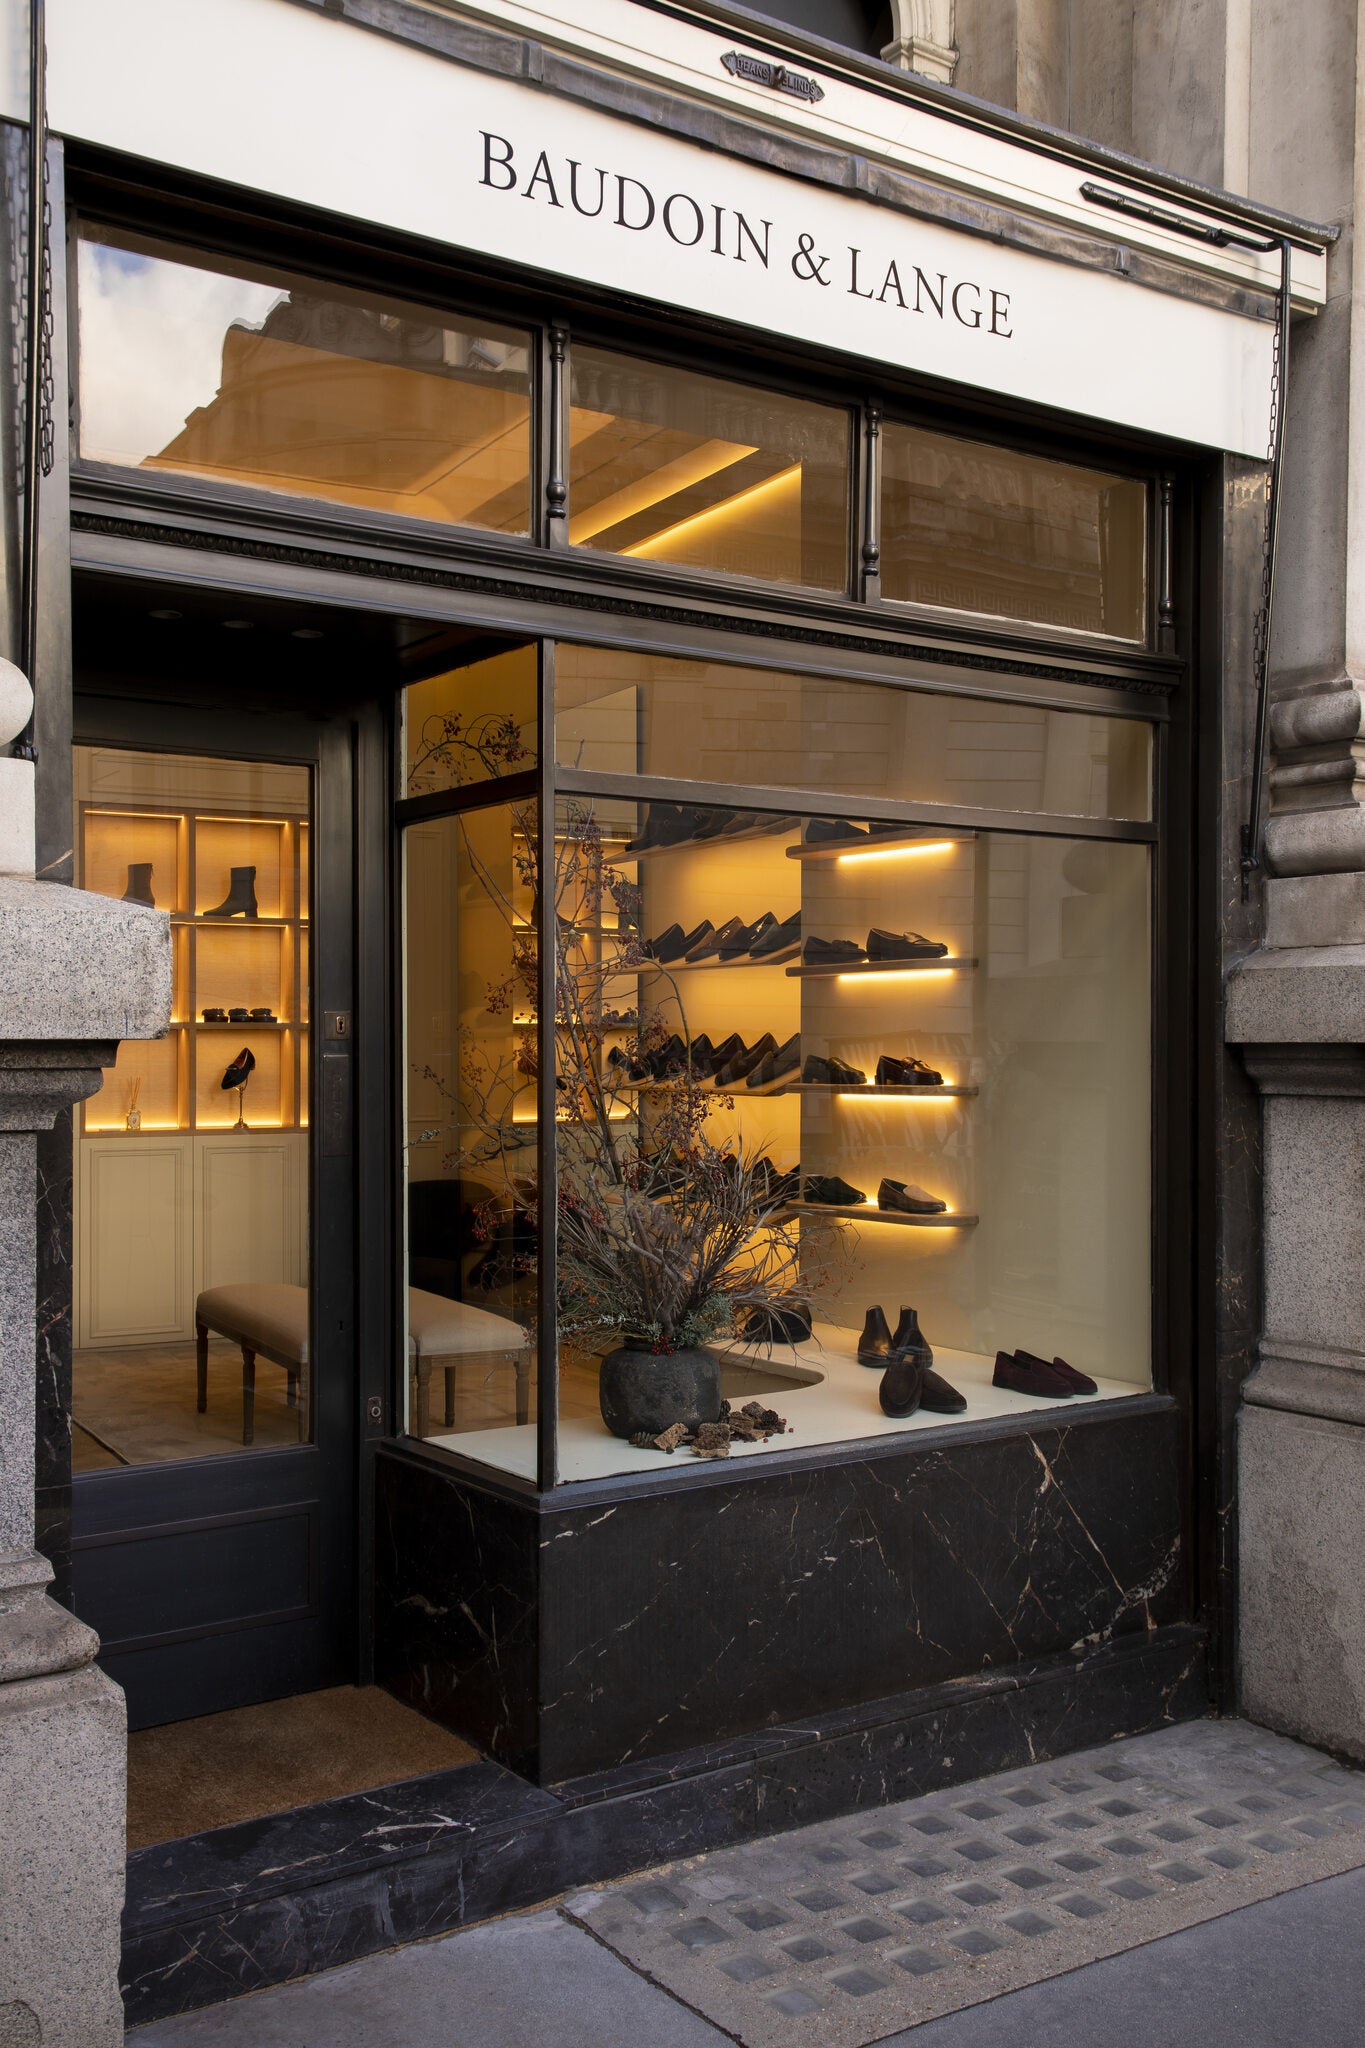 Baudoin & Lange Opens New Store at the Royal Exchange in London